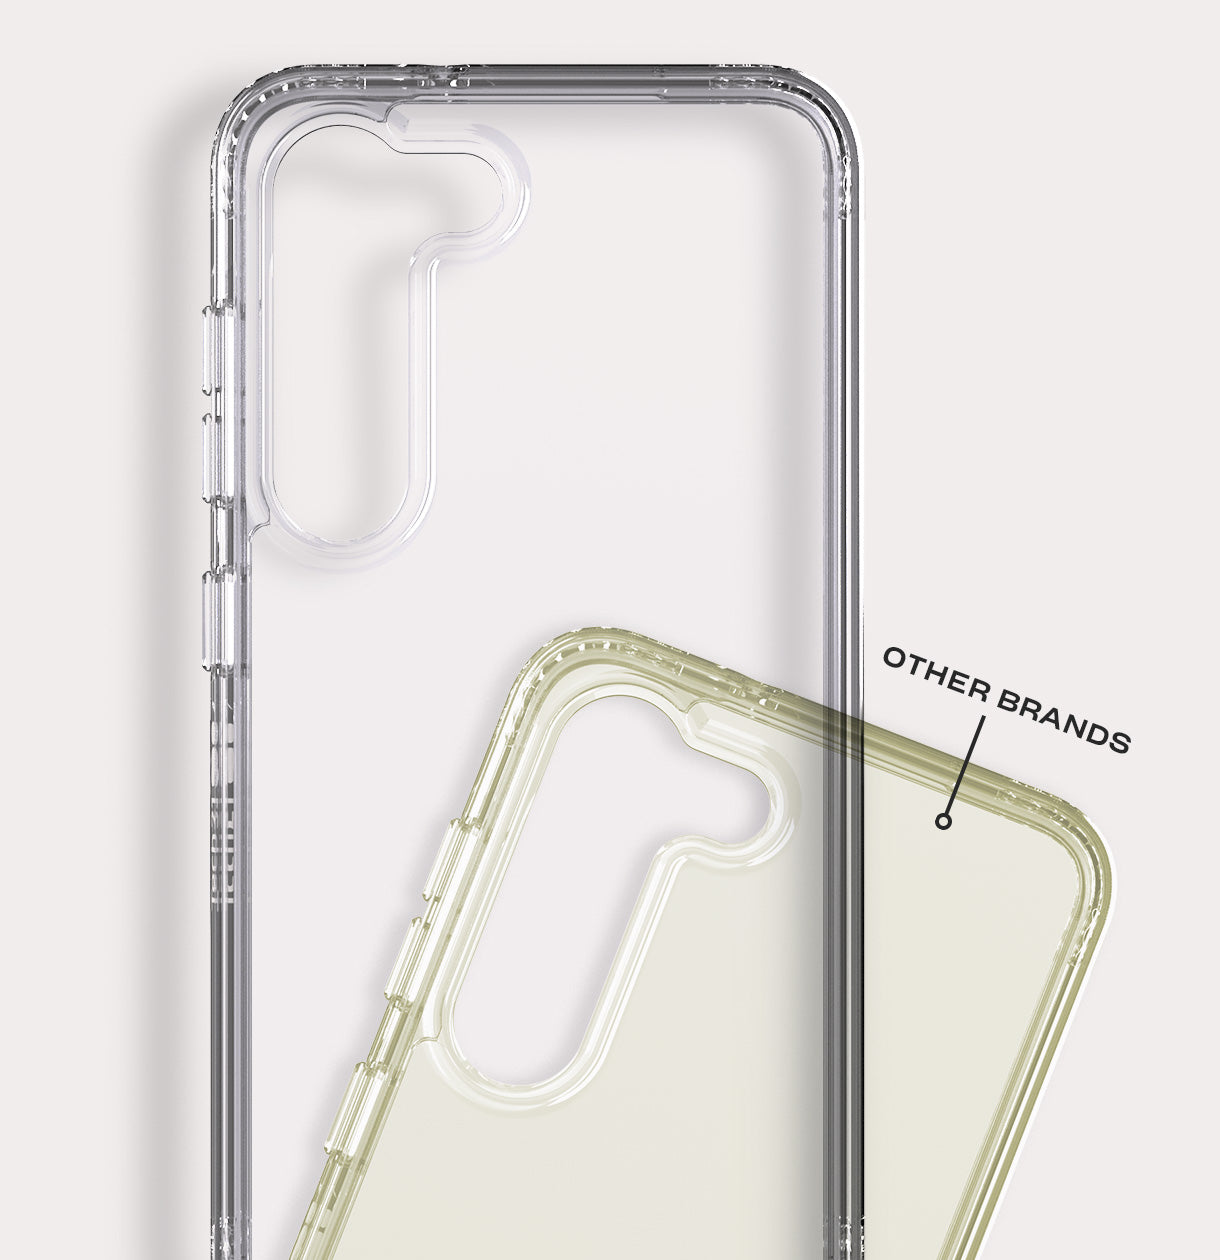 Skinit Clear Phone Case for Google Pixel 6 Pro - Originally Designed  Neutral Checkered Design